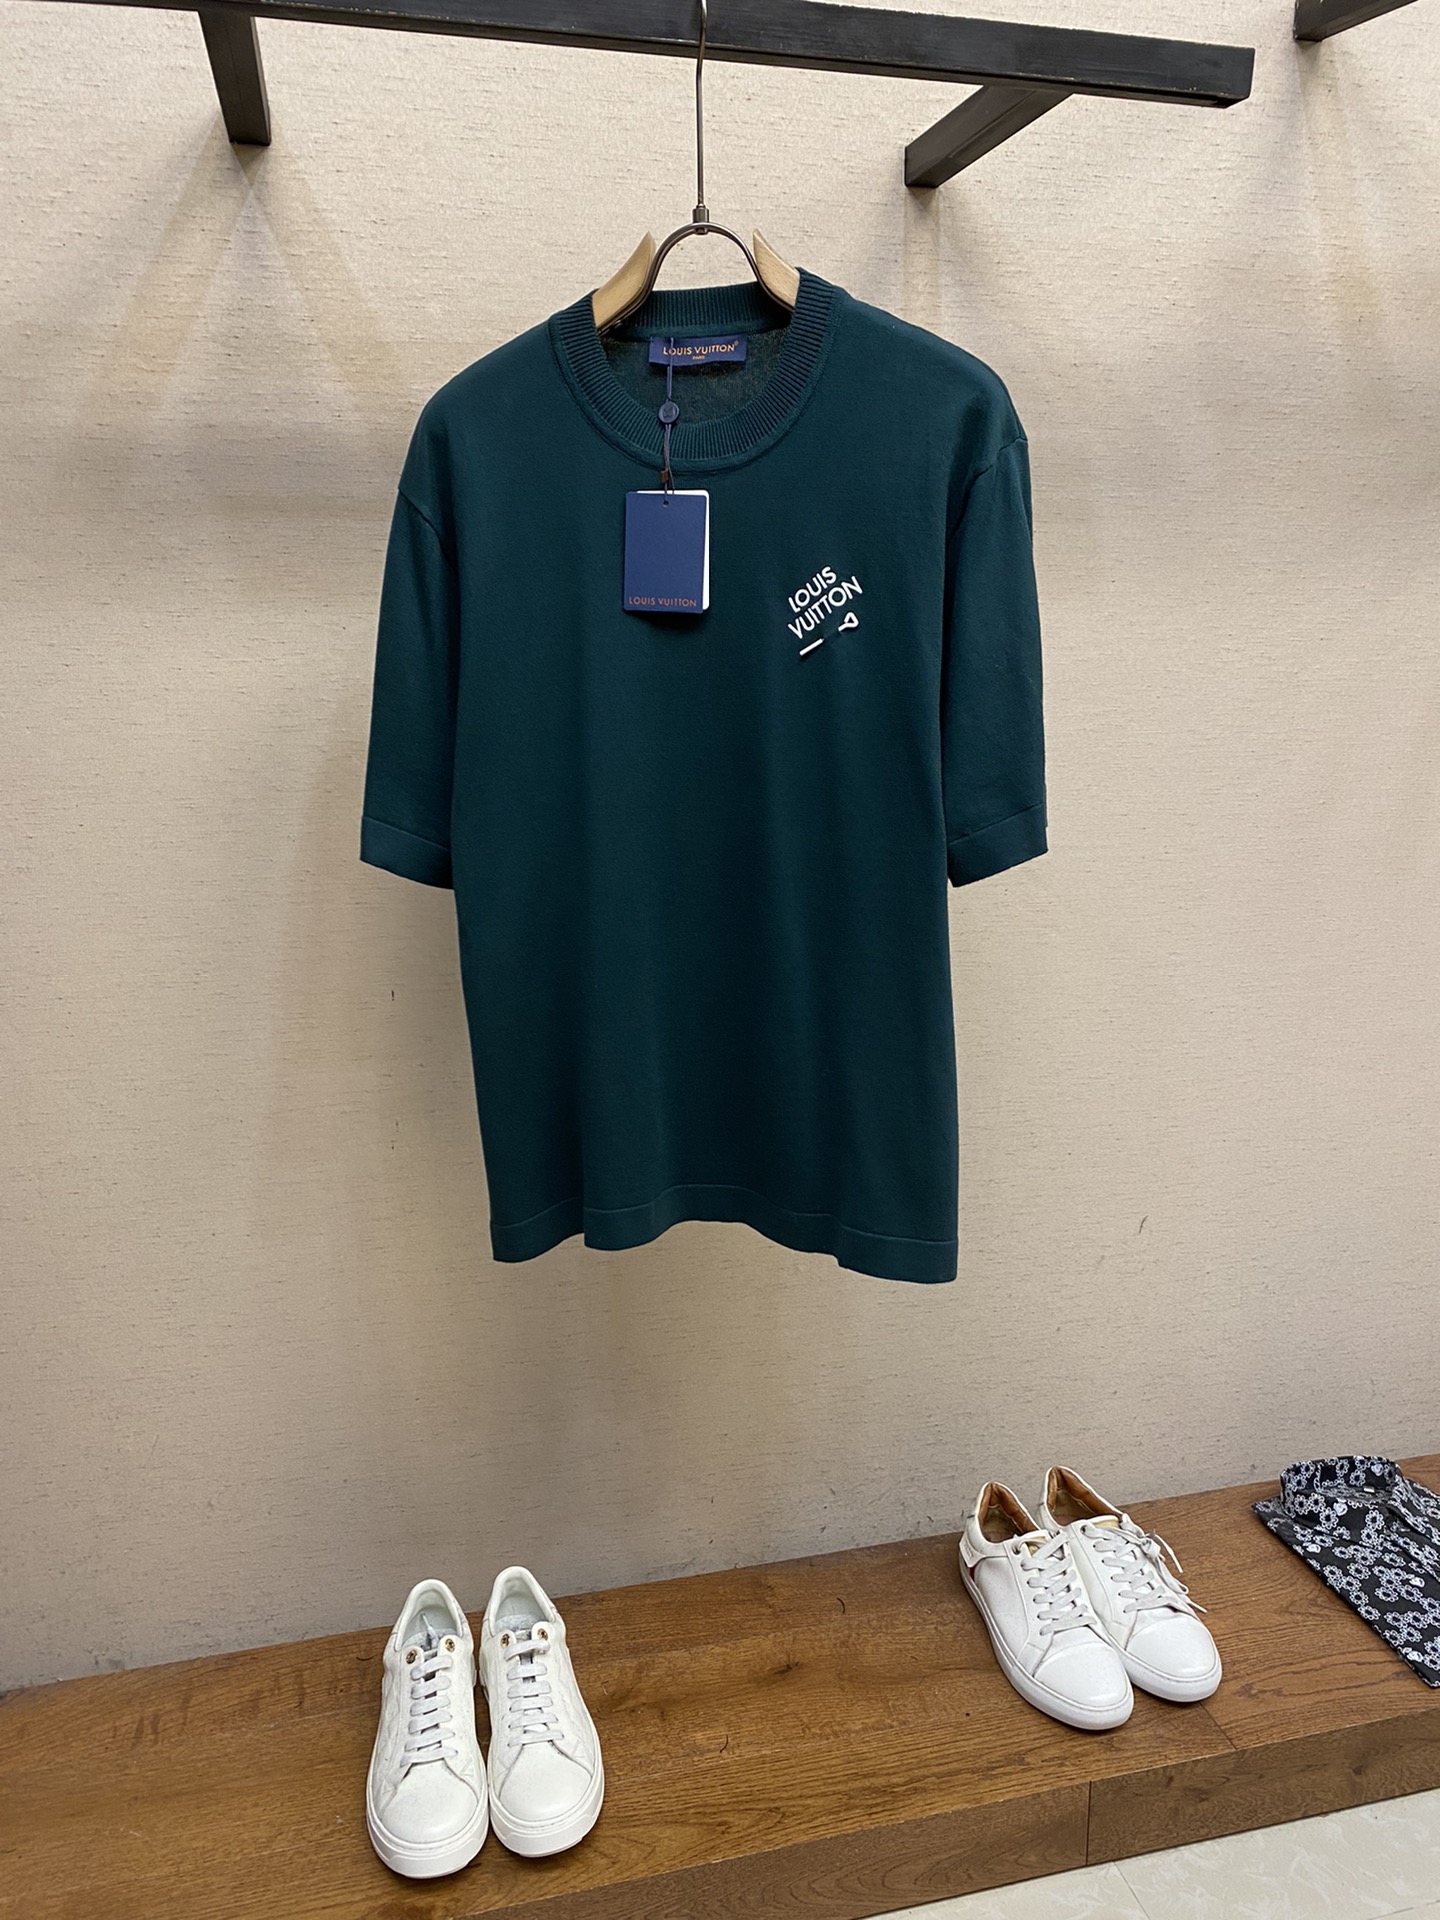 Louis Vuitton Clothing T-Shirt Blue Green Embroidery Cotton Knitting